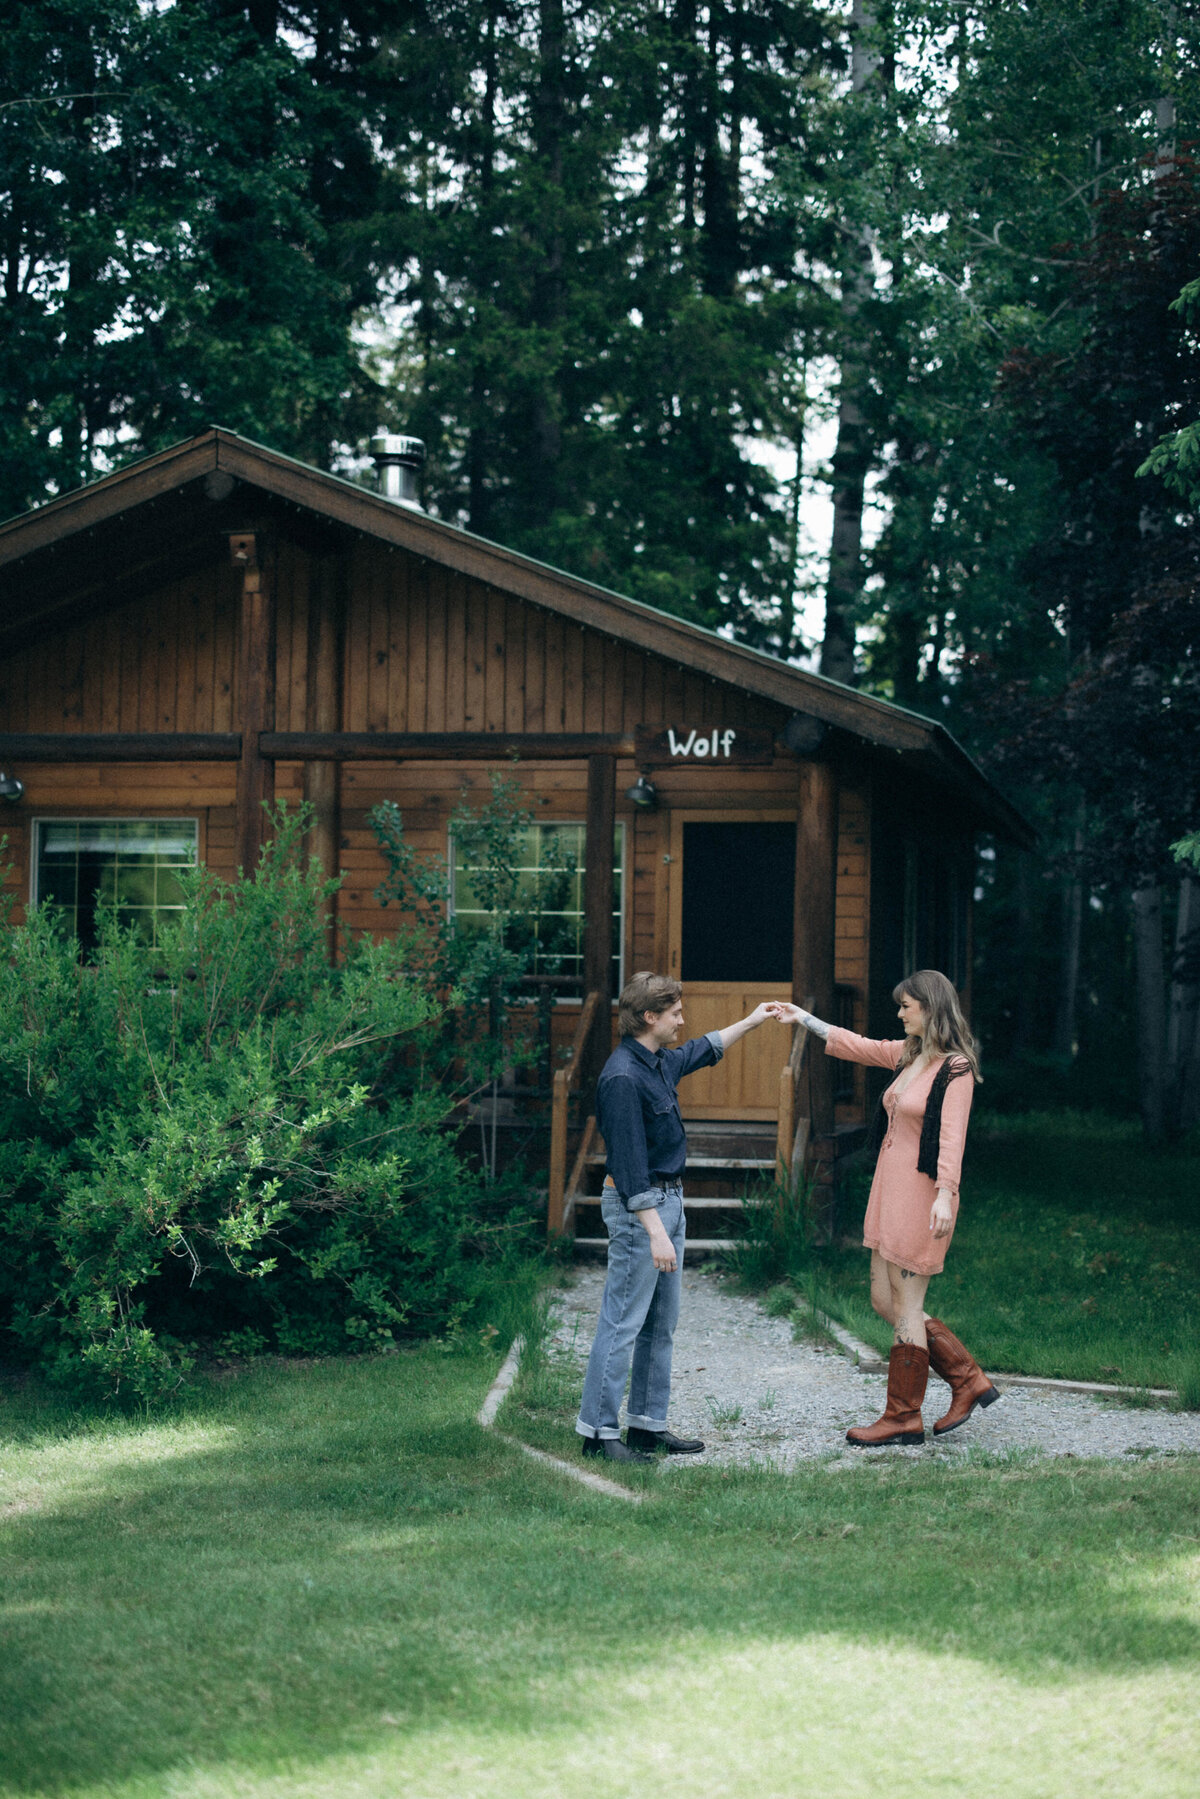 vpc-couples-vintage-cabin-shoot-2